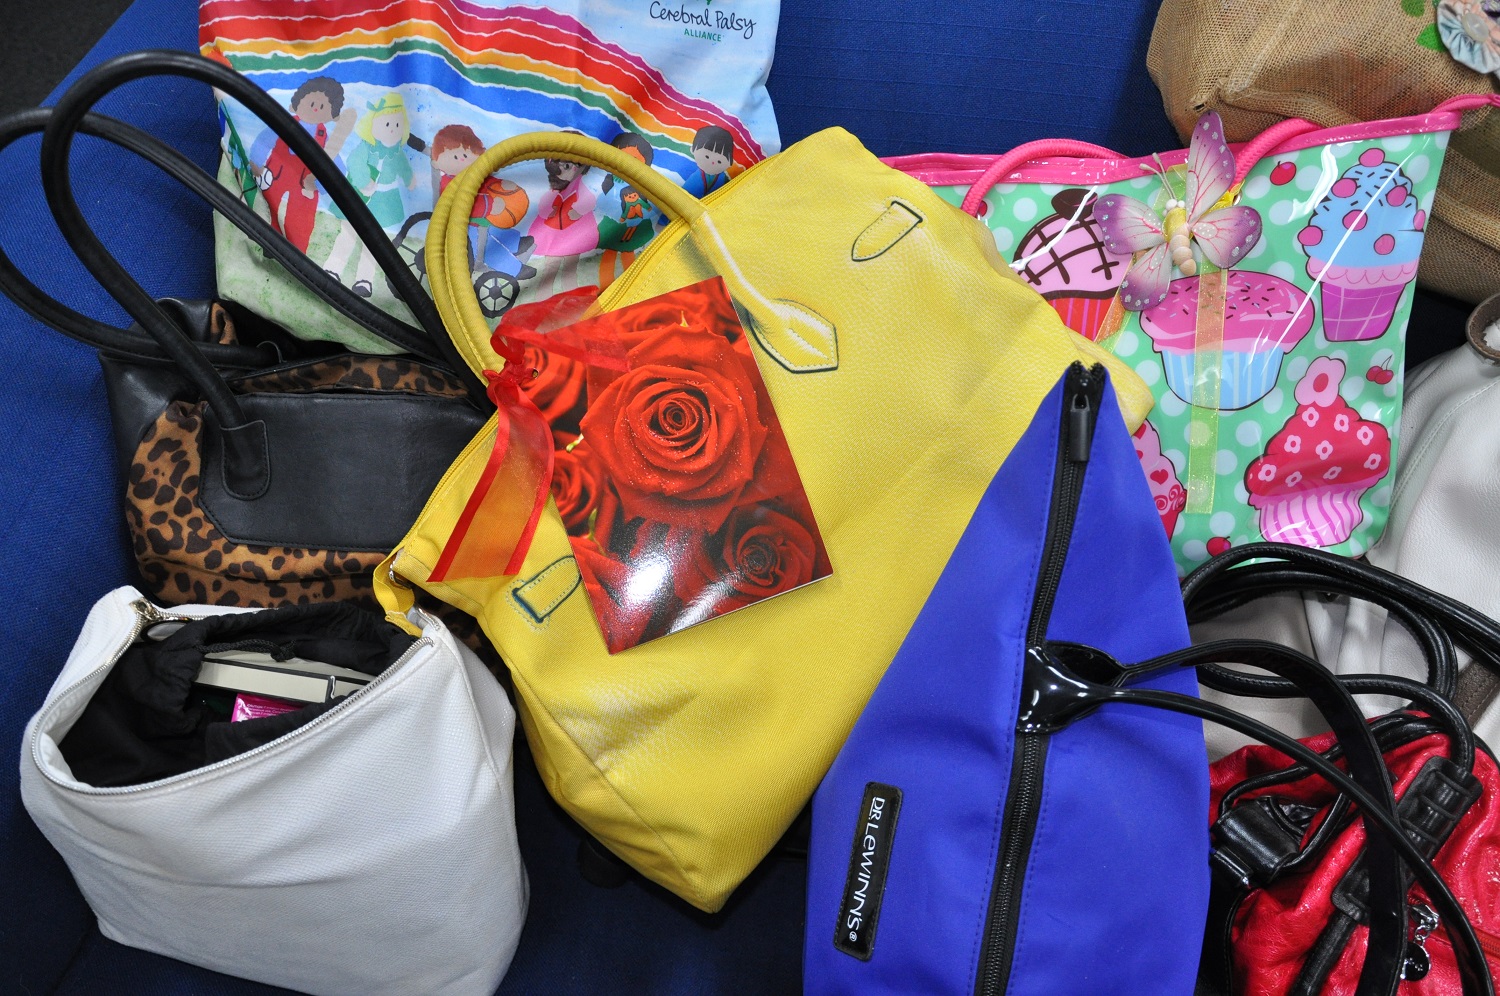 Handbags donated from Share the Dignity